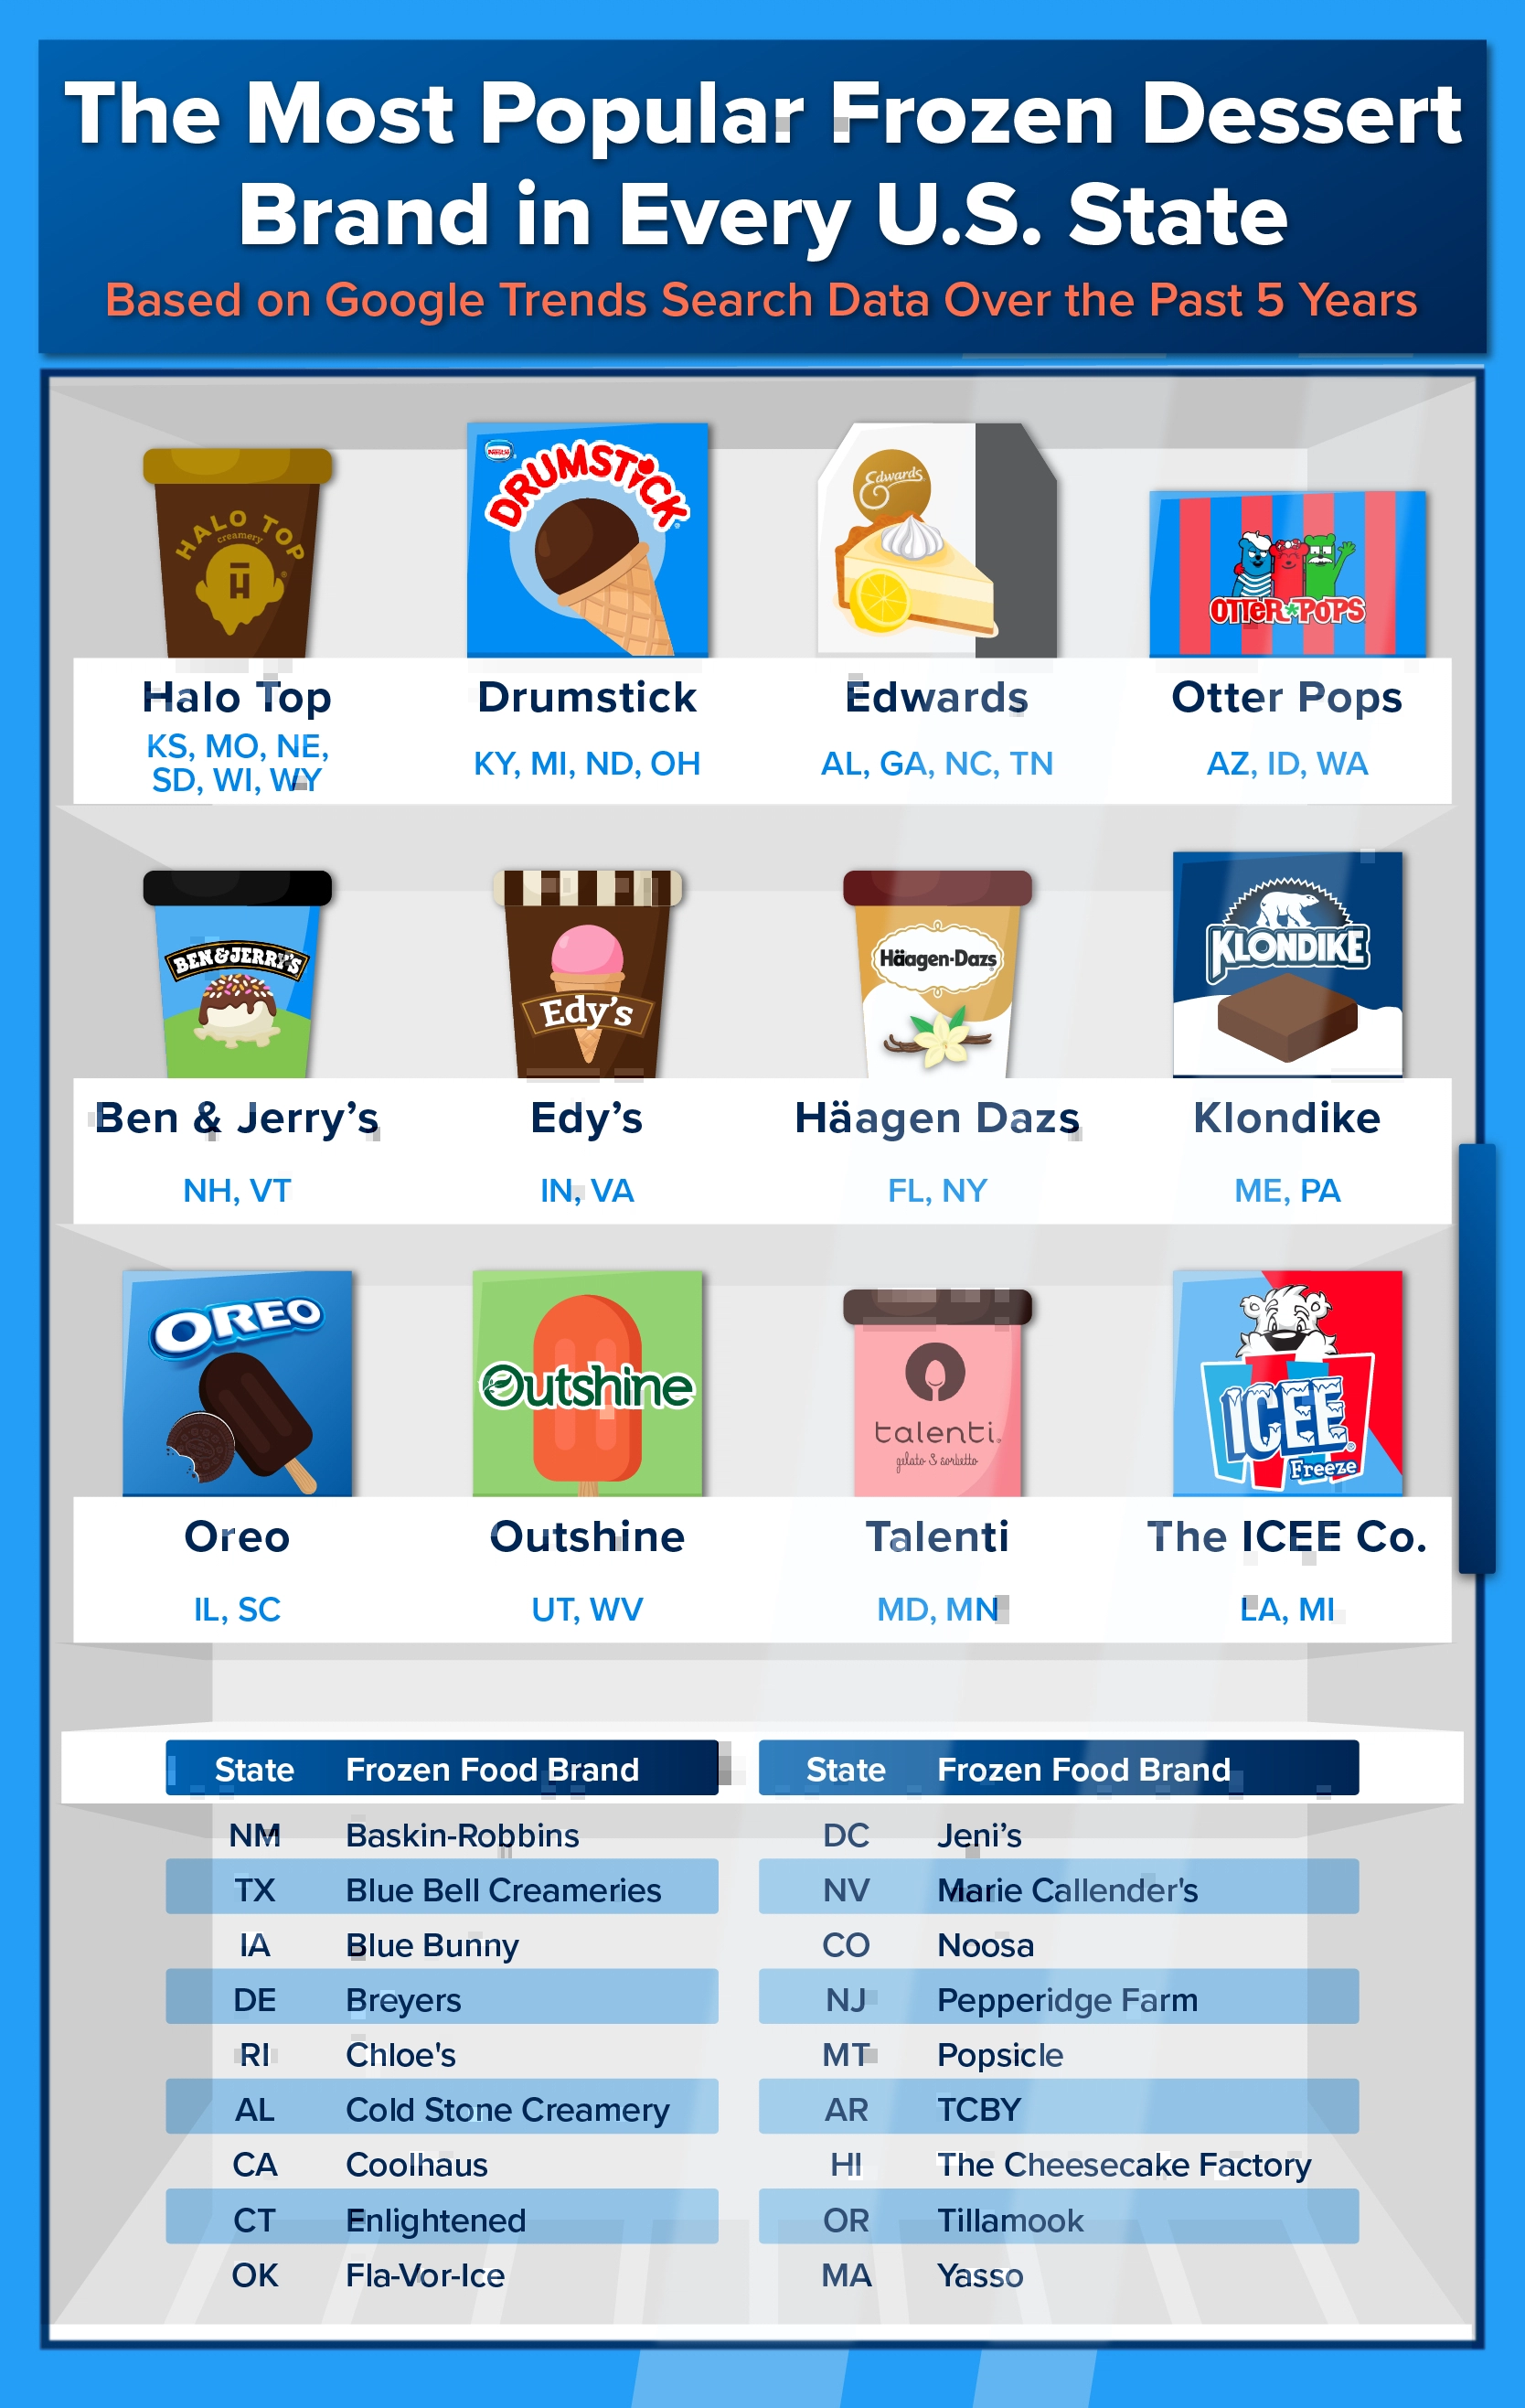 An infographic showing the most popular frozen dessert brand in every state.